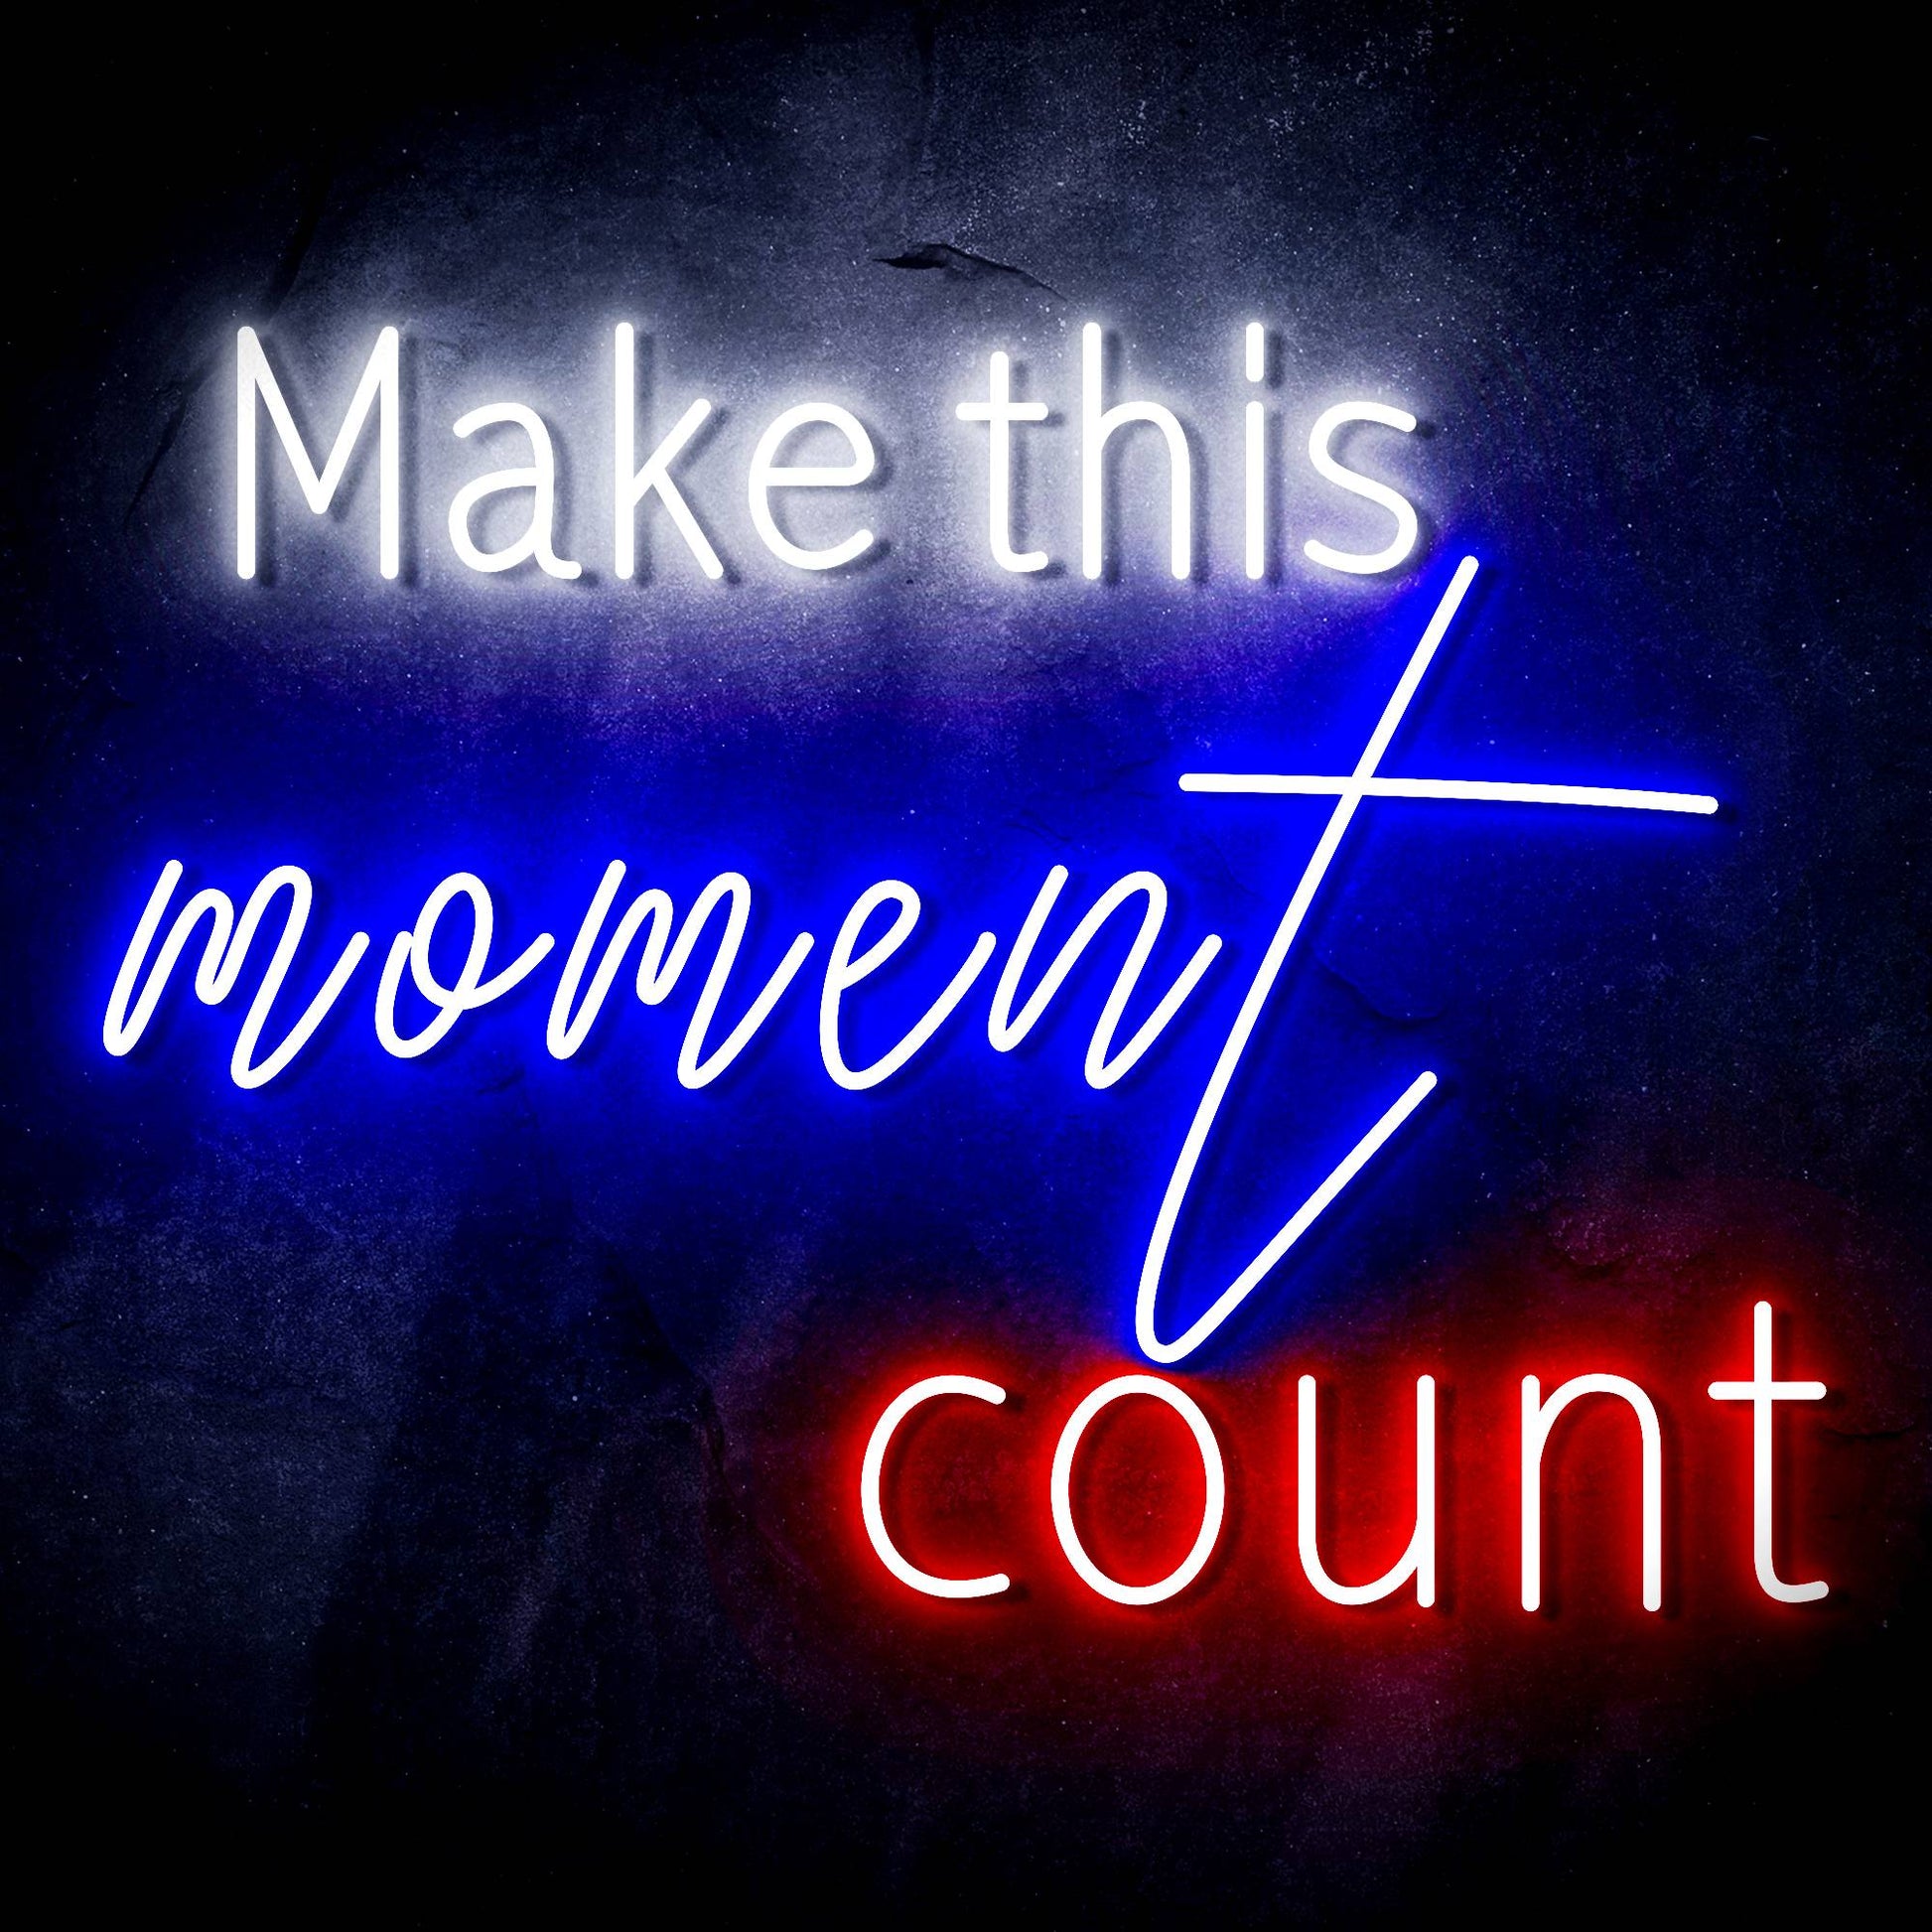 Make This Moment Count Ultra-Bright LED Neon Sign - Way Up Gifts